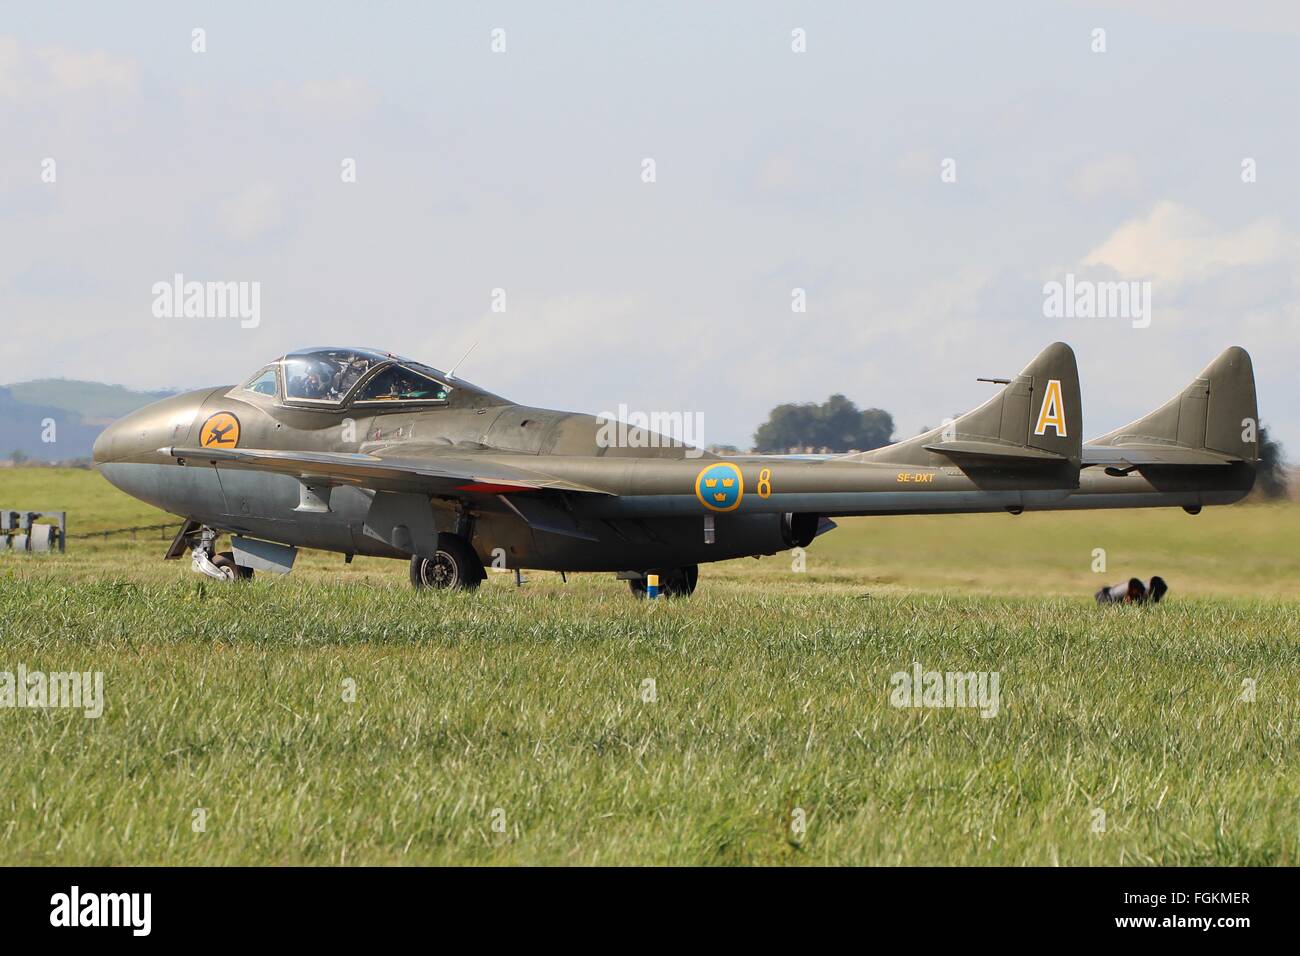 SE-DXT, a de Havilland Vampire T55 of the Swedish Air Force Historic Flight, taxis out for display at Leuchars in 2013. Stock Photo